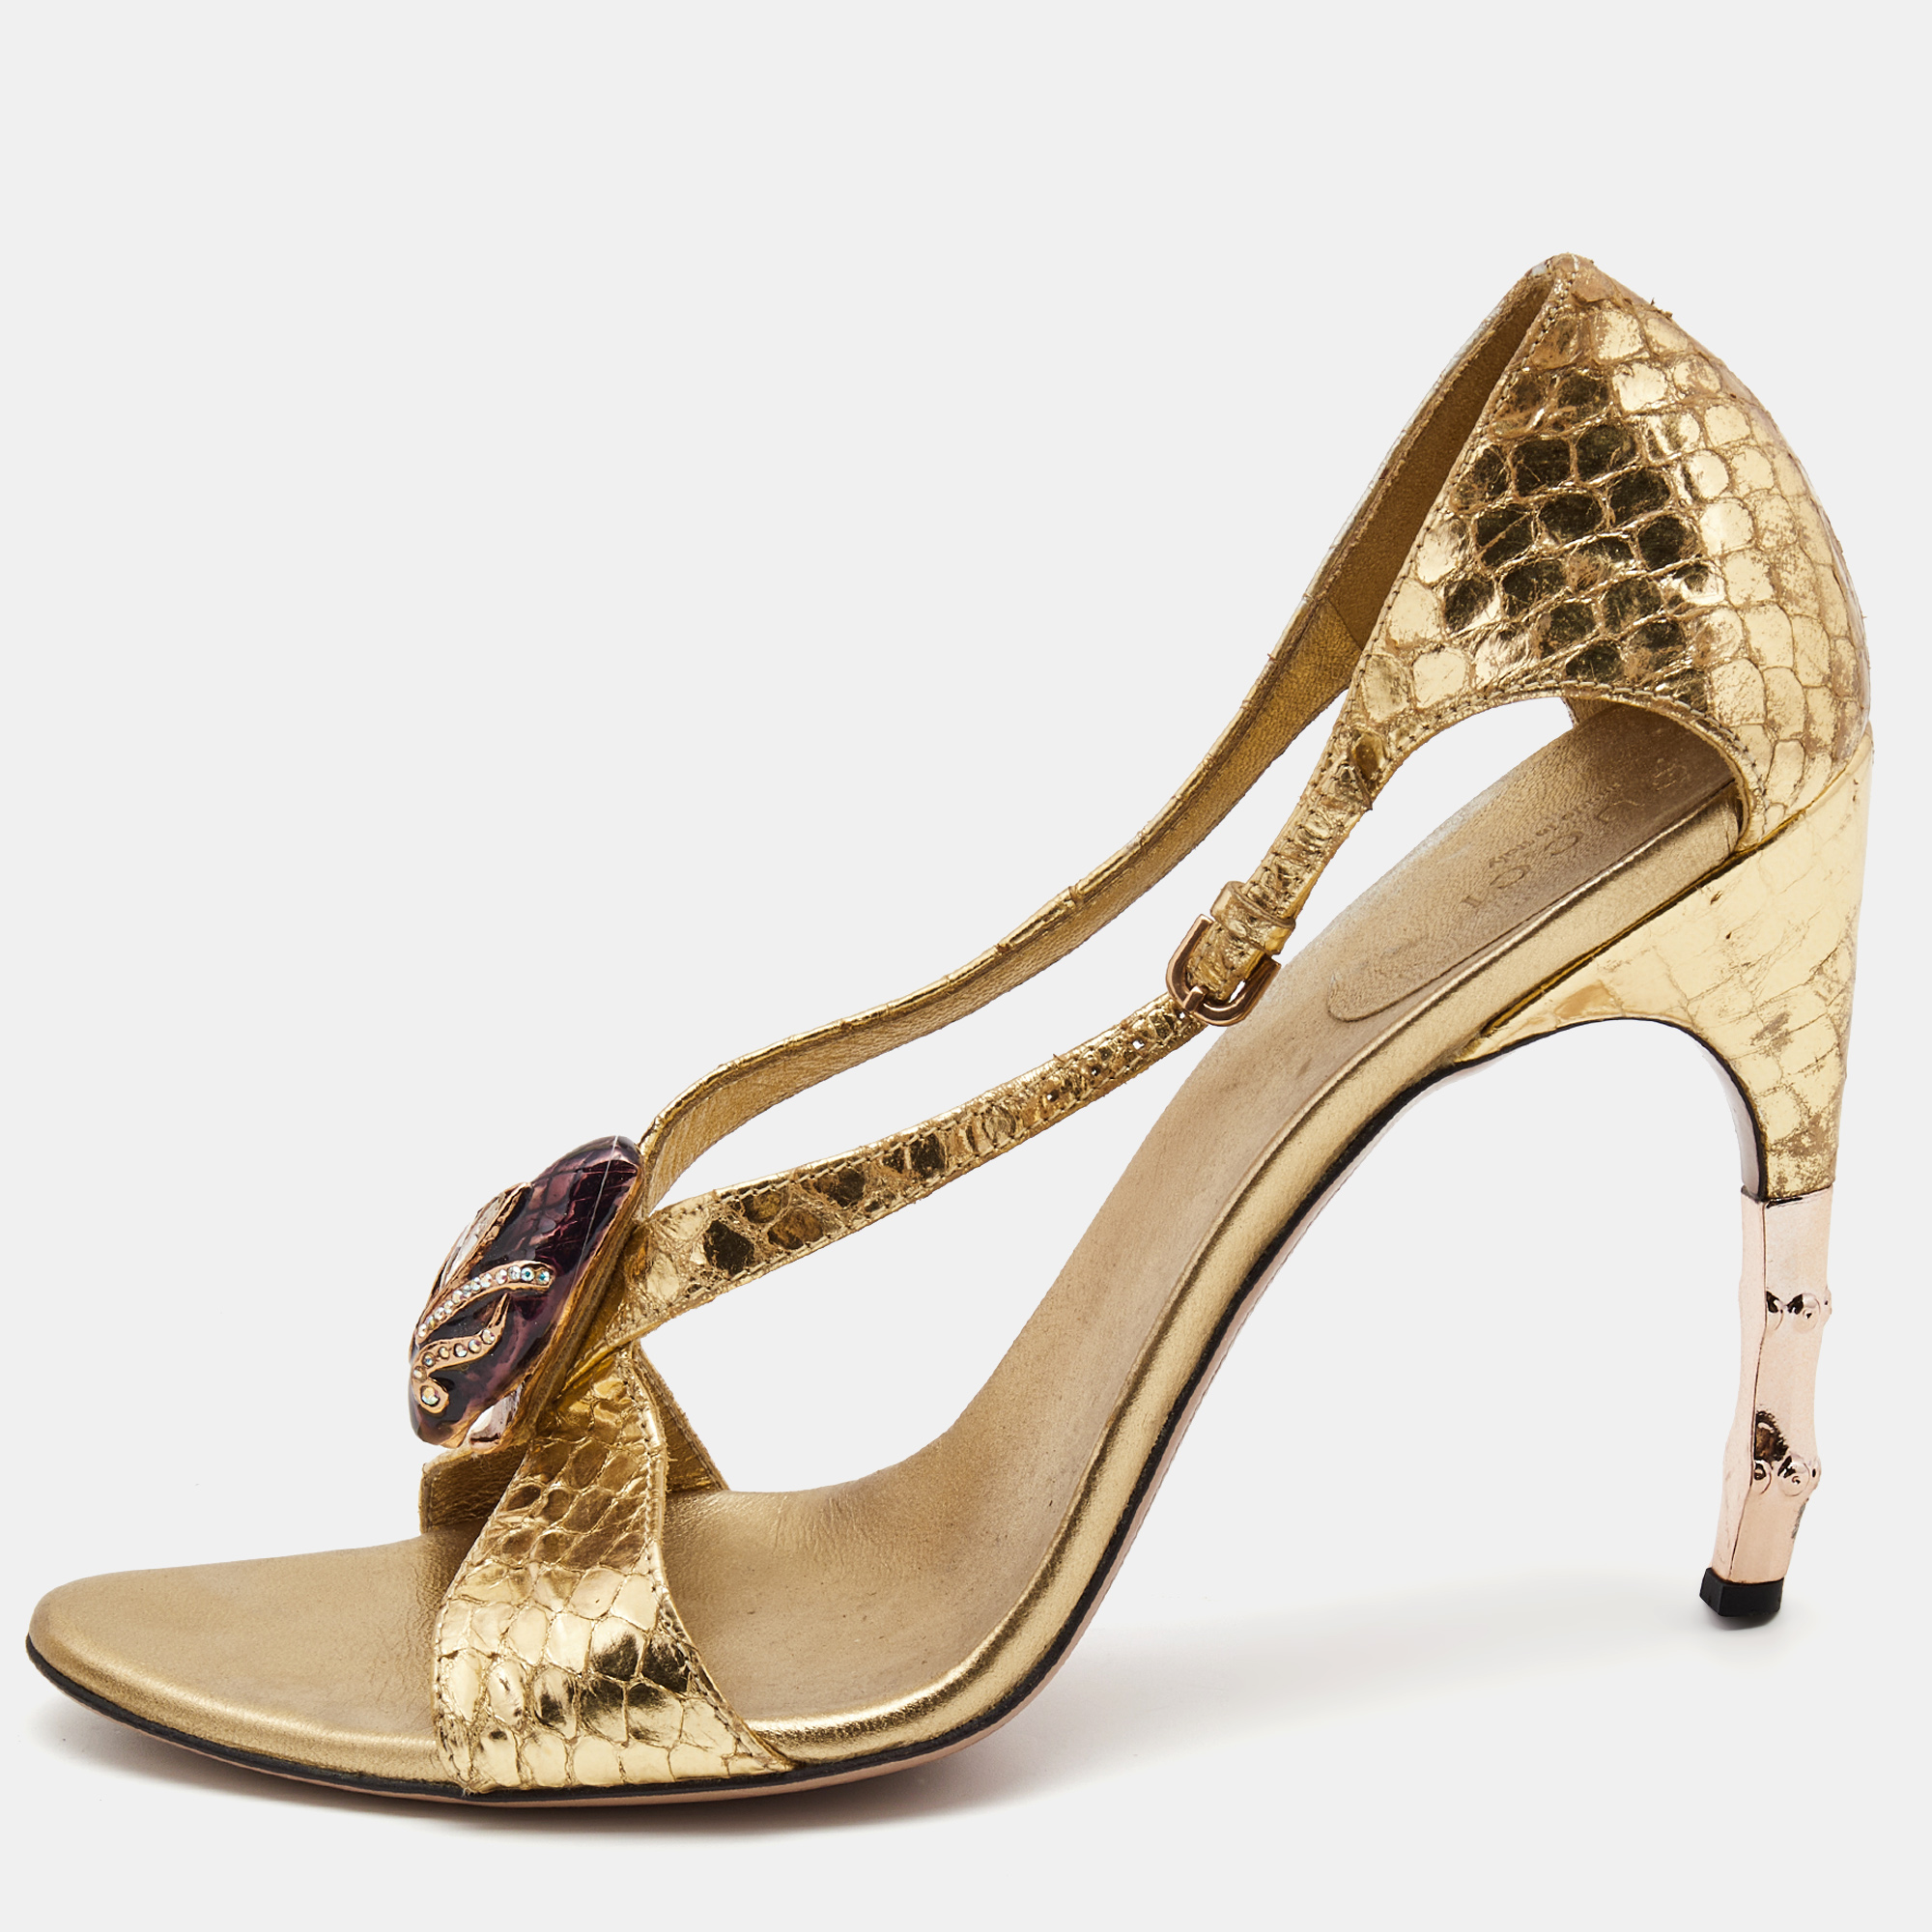 Pre-owned Gucci Gold Python Embossed Leather Jeweled Sandals Size 38